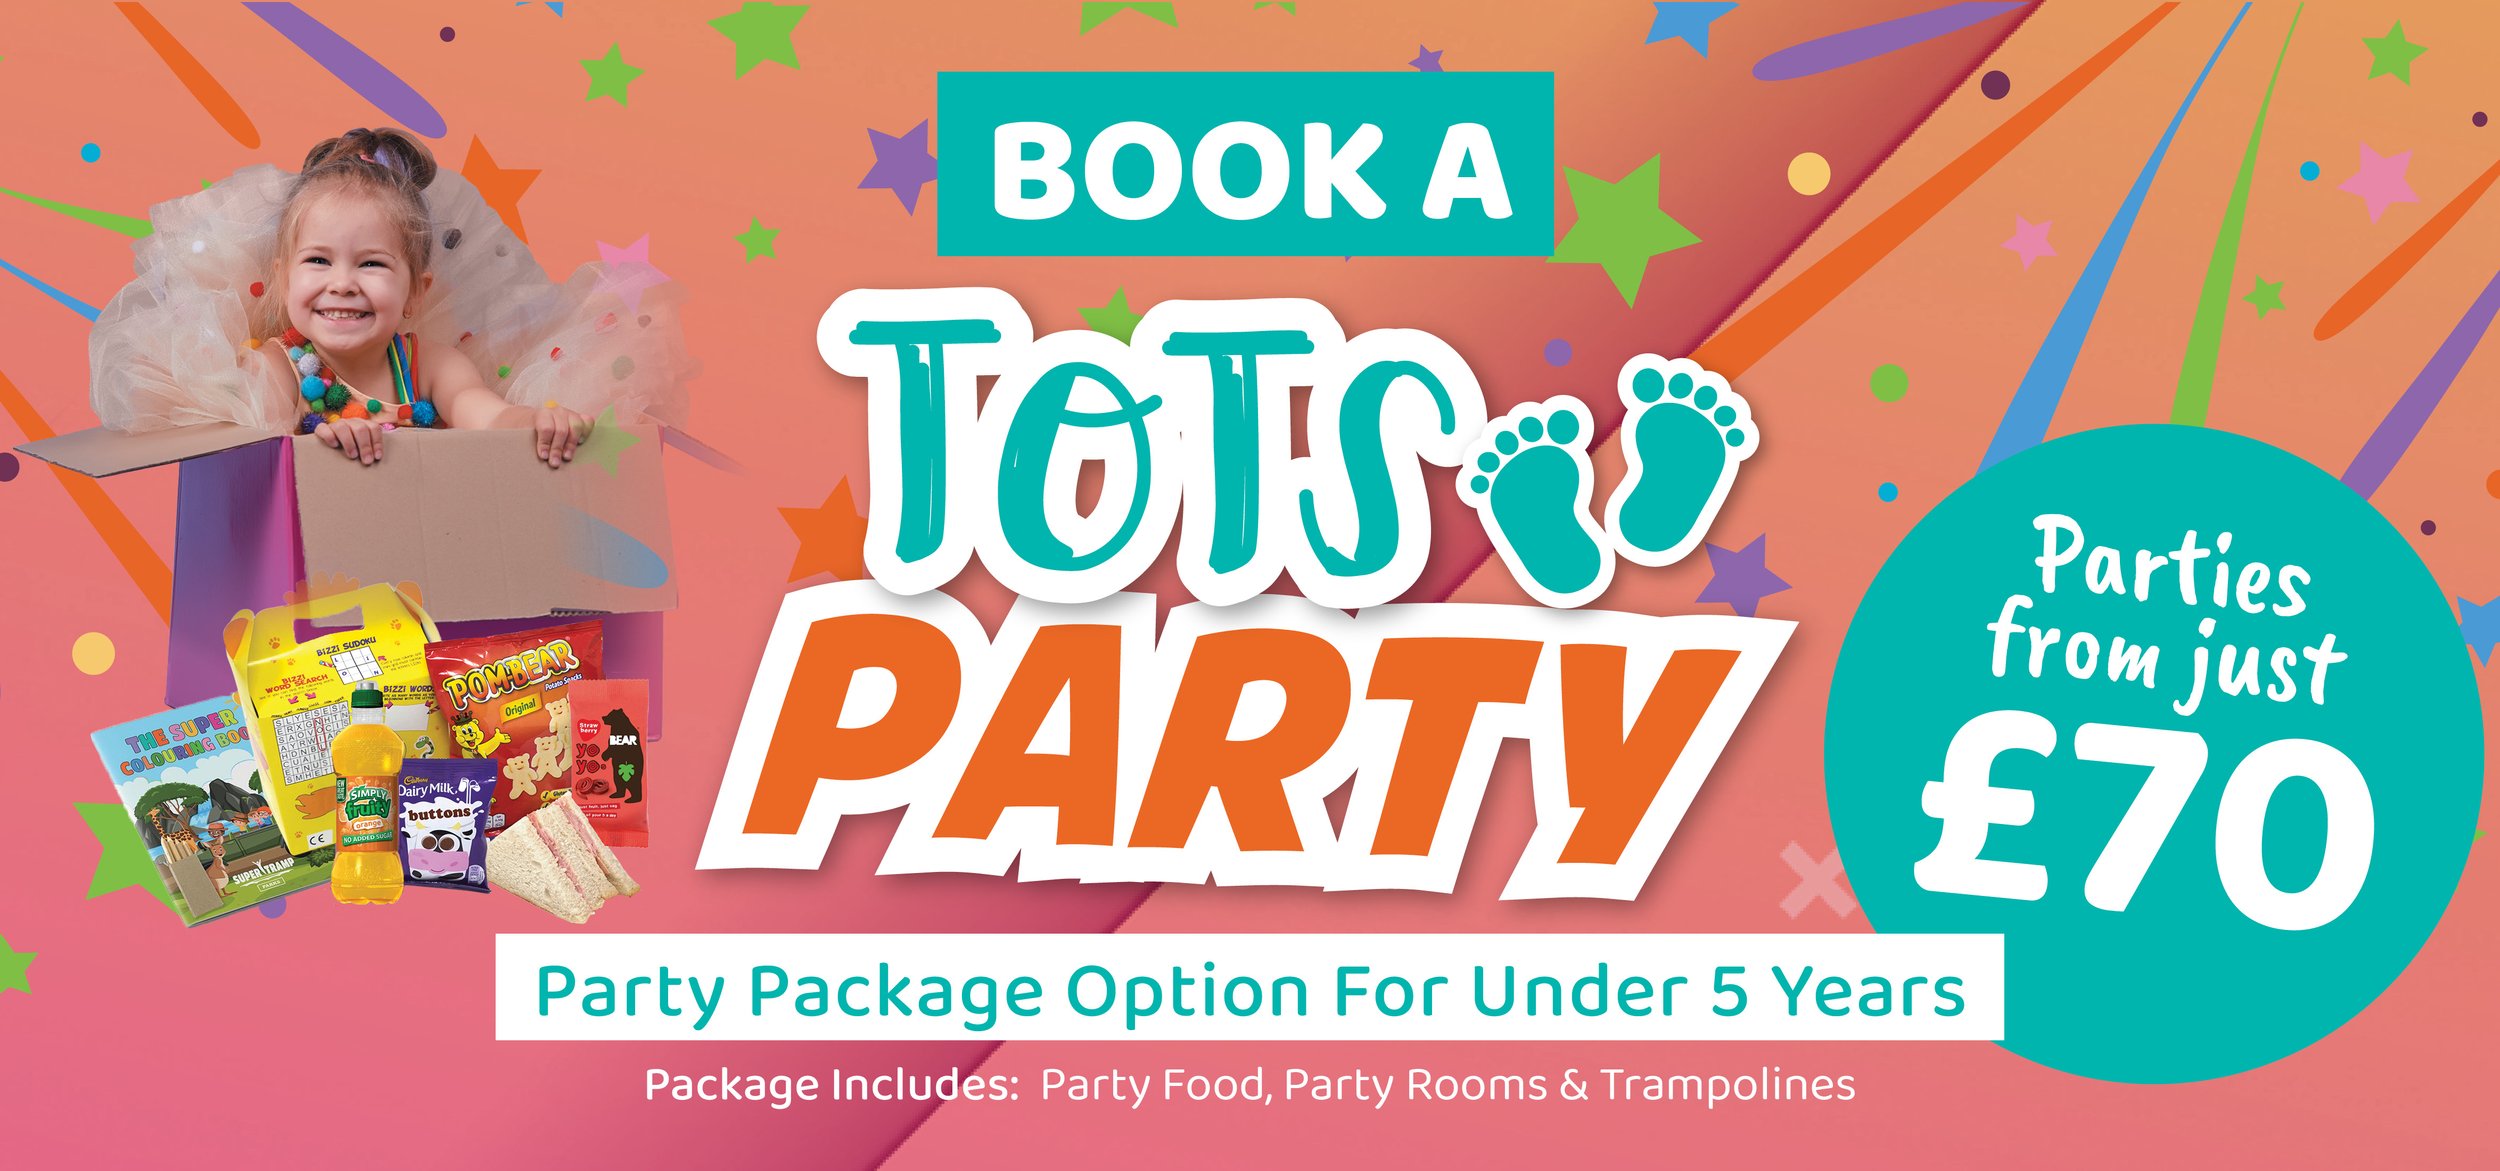 Book A Tots Party - Website Banners.jpg